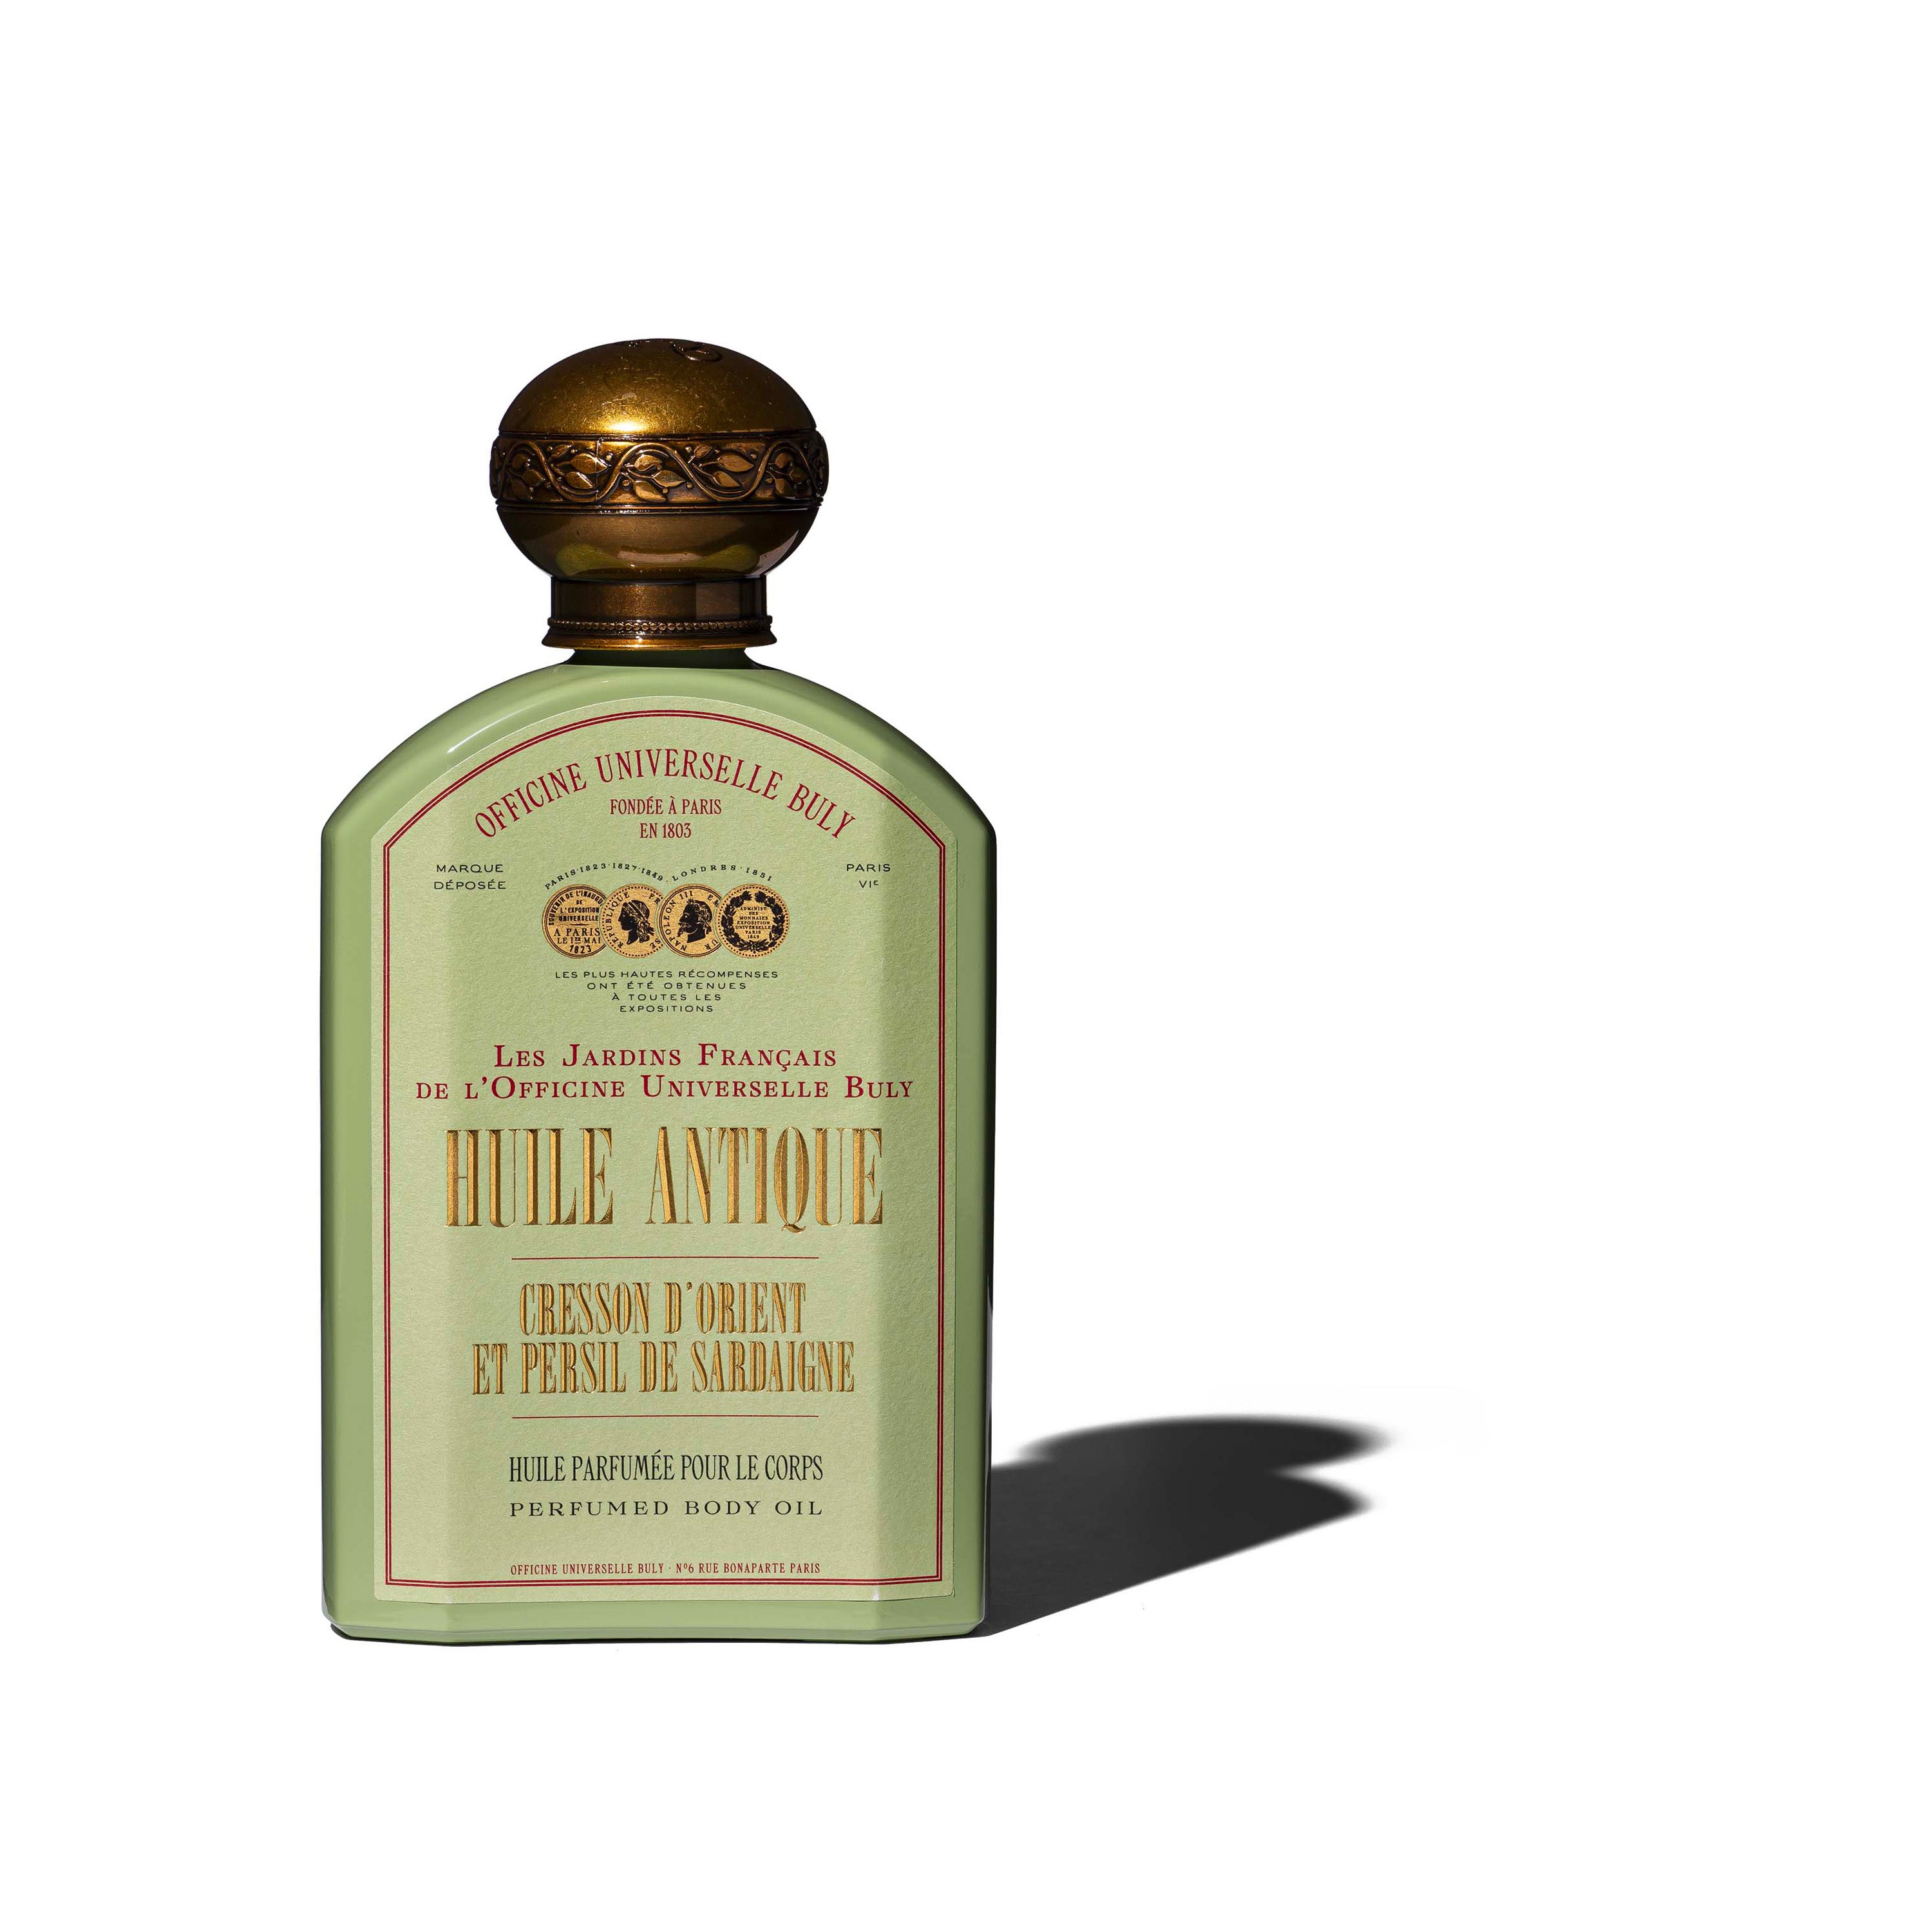 SCENTED BODY OILS – Officine Universelle Buly